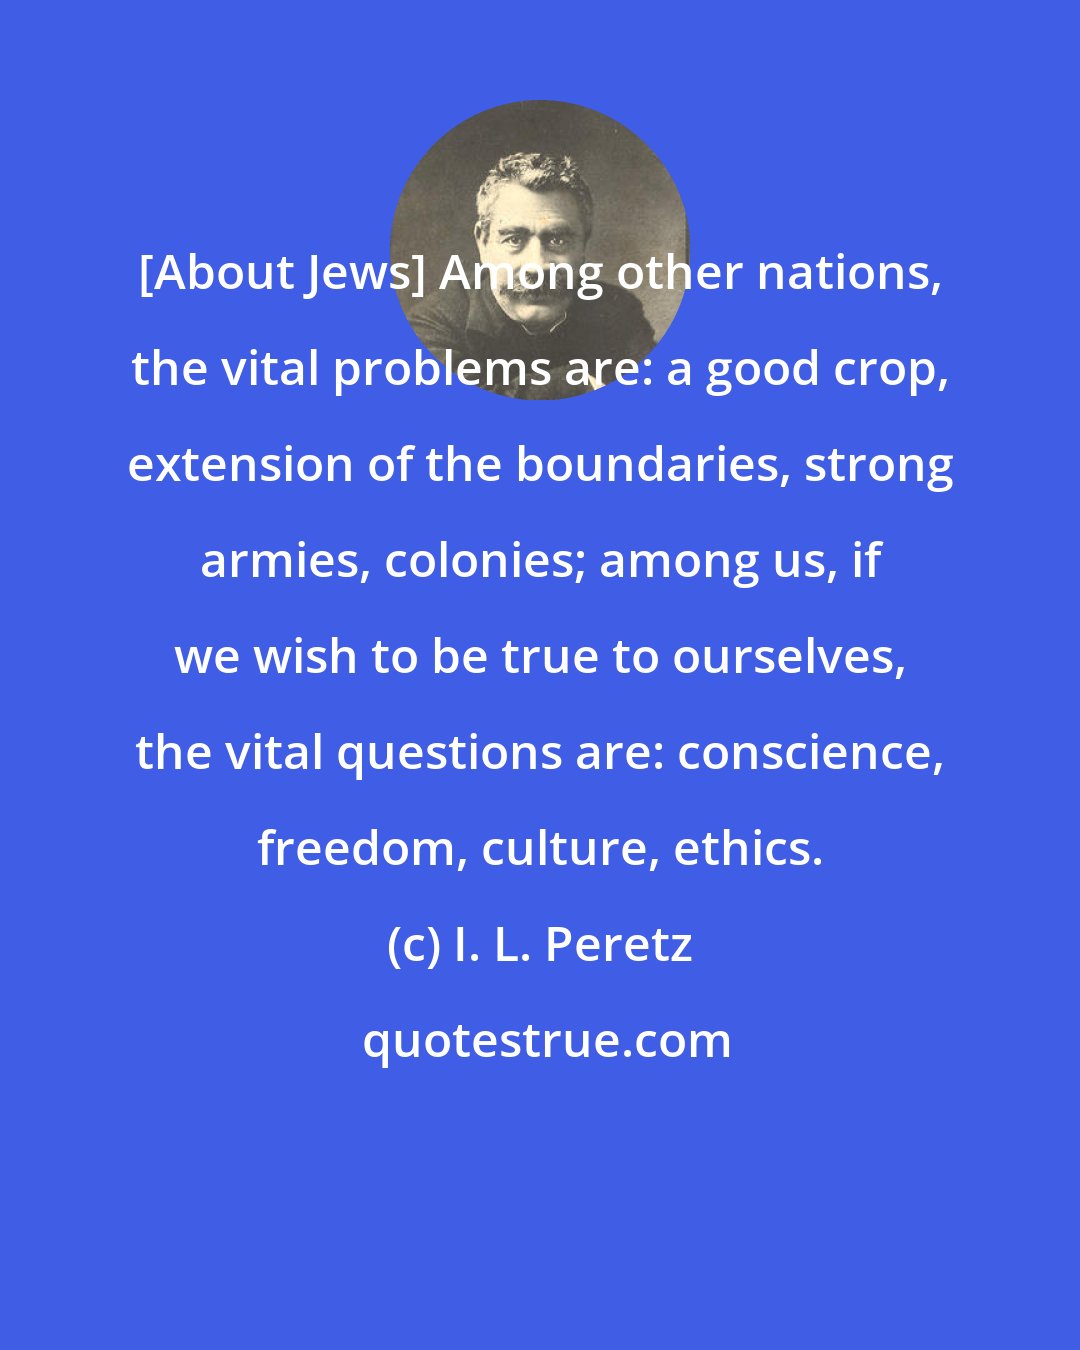 I. L. Peretz: [About Jews] Among other nations, the vital problems are: a good crop, extension of the boundaries, strong armies, colonies; among us, if we wish to be true to ourselves, the vital questions are: conscience, freedom, culture, ethics.